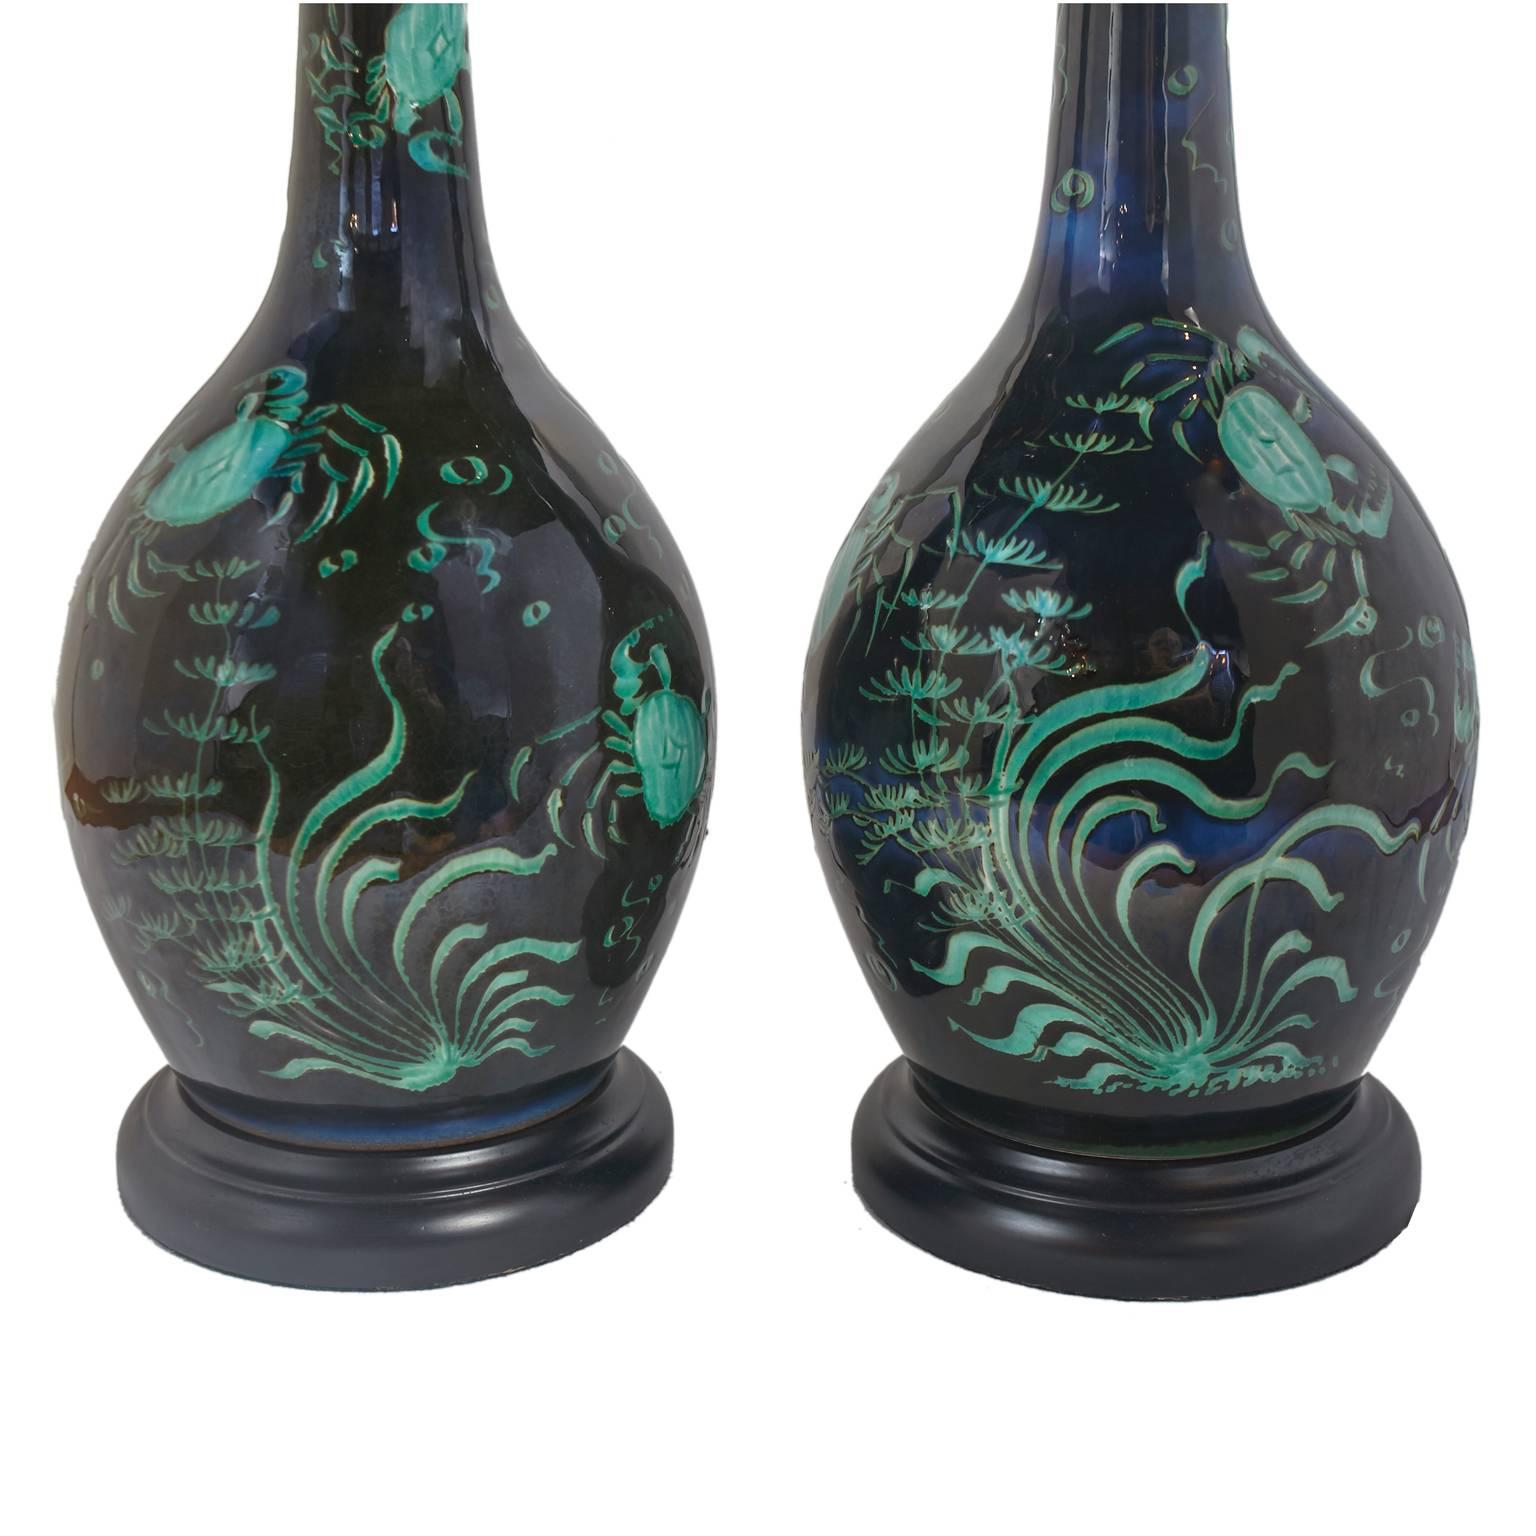 American Pair of Deep Blue Ceramic Lamps with Turquoise Green Crabs and Ocean Plants